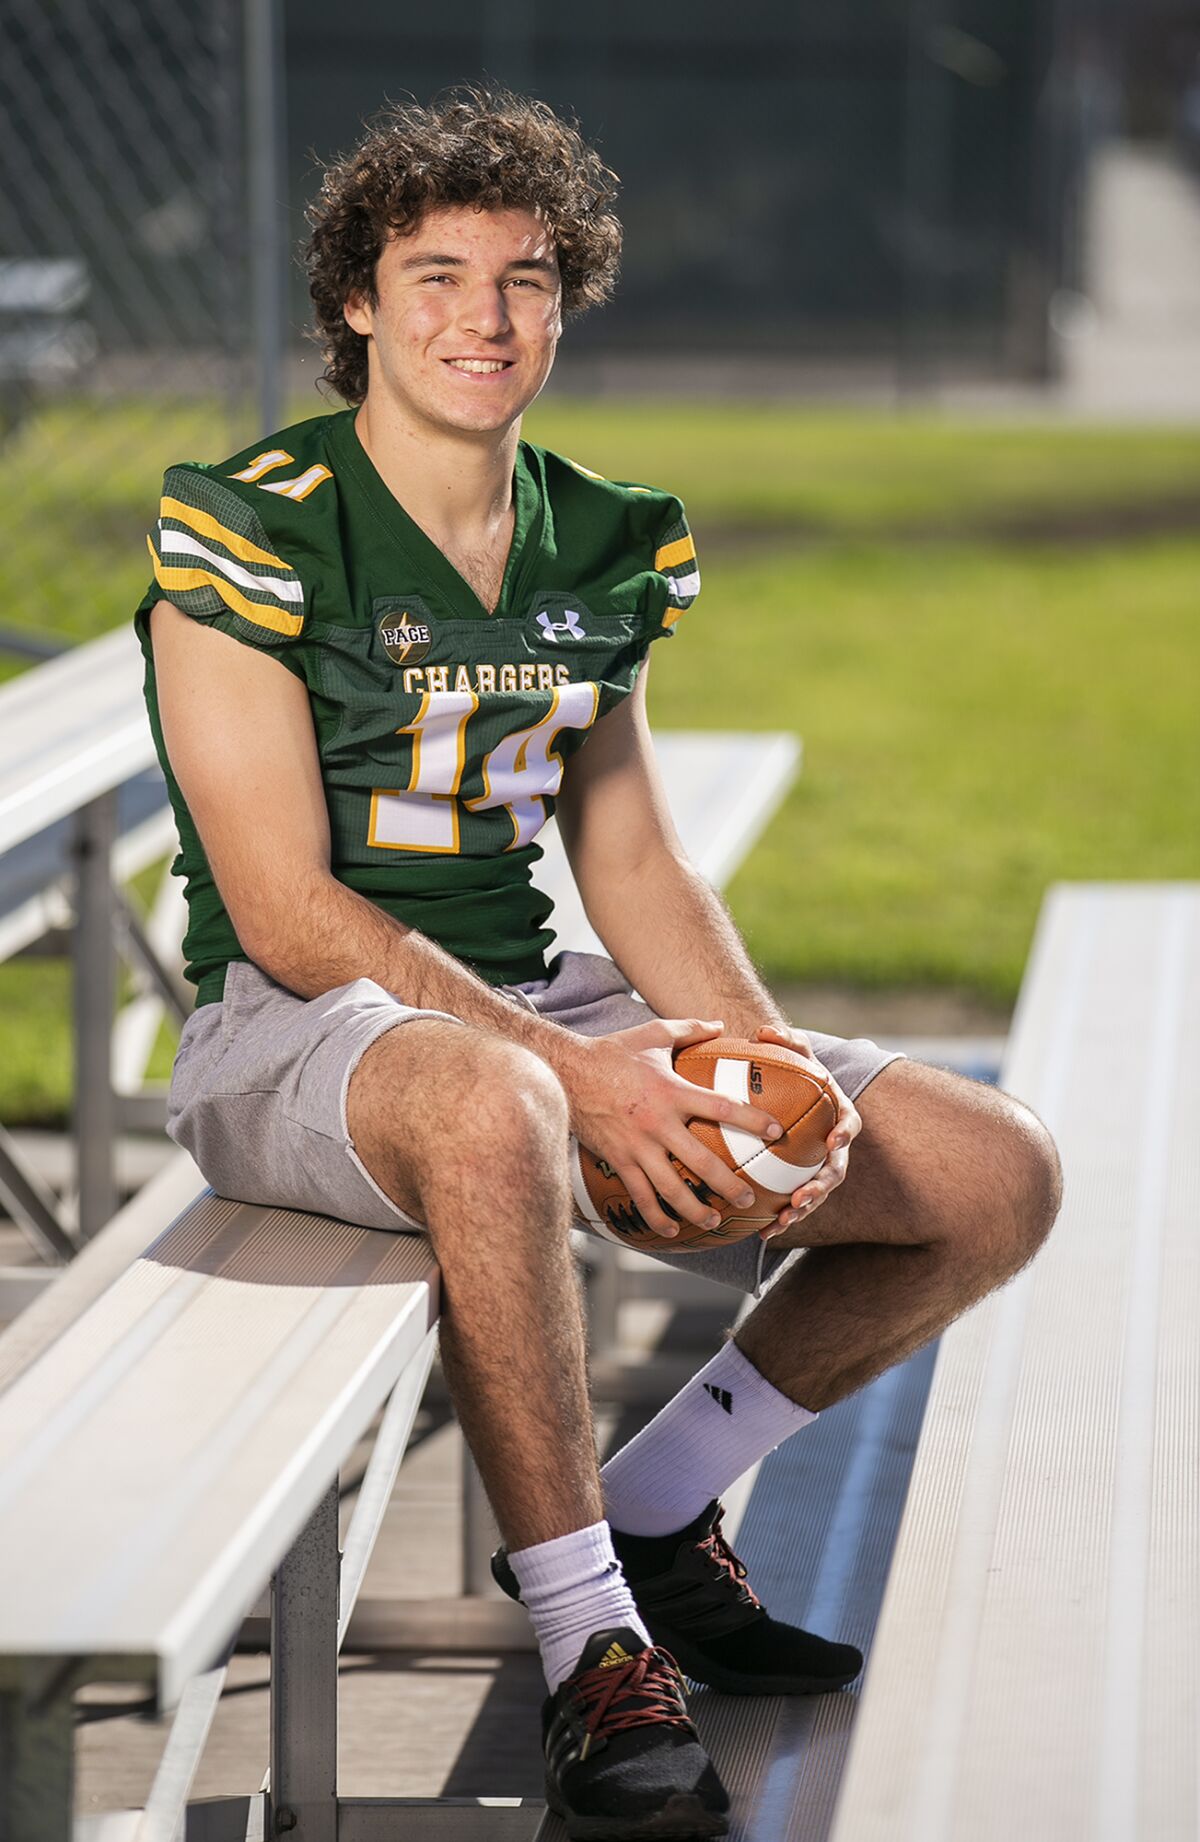 Edison High senior quarterback Parker Awad helped the Chargers to an impressive 9-2 record.